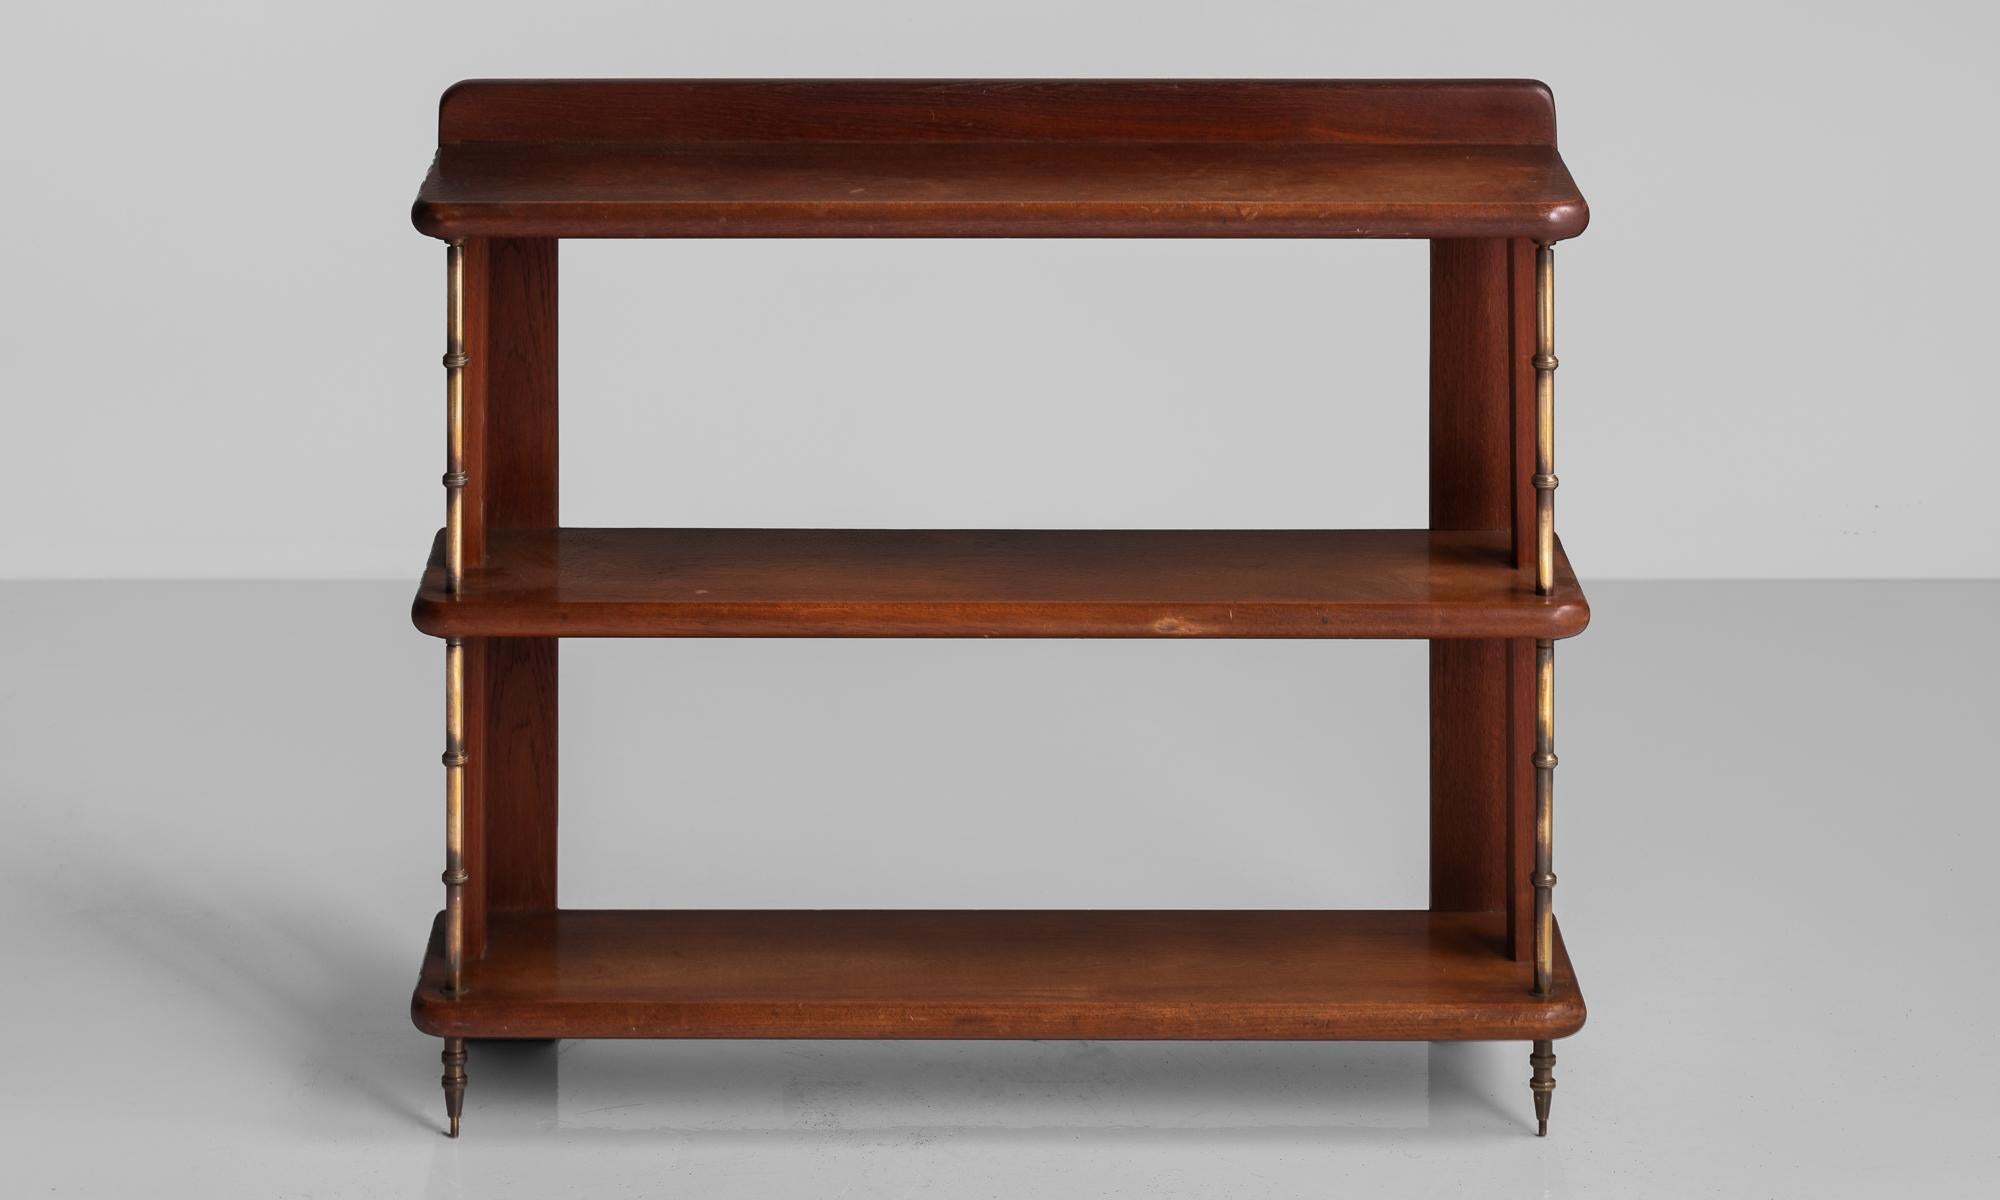 Teak and Brass Campaign Style Shelves, England, circa 1930 (Messing)